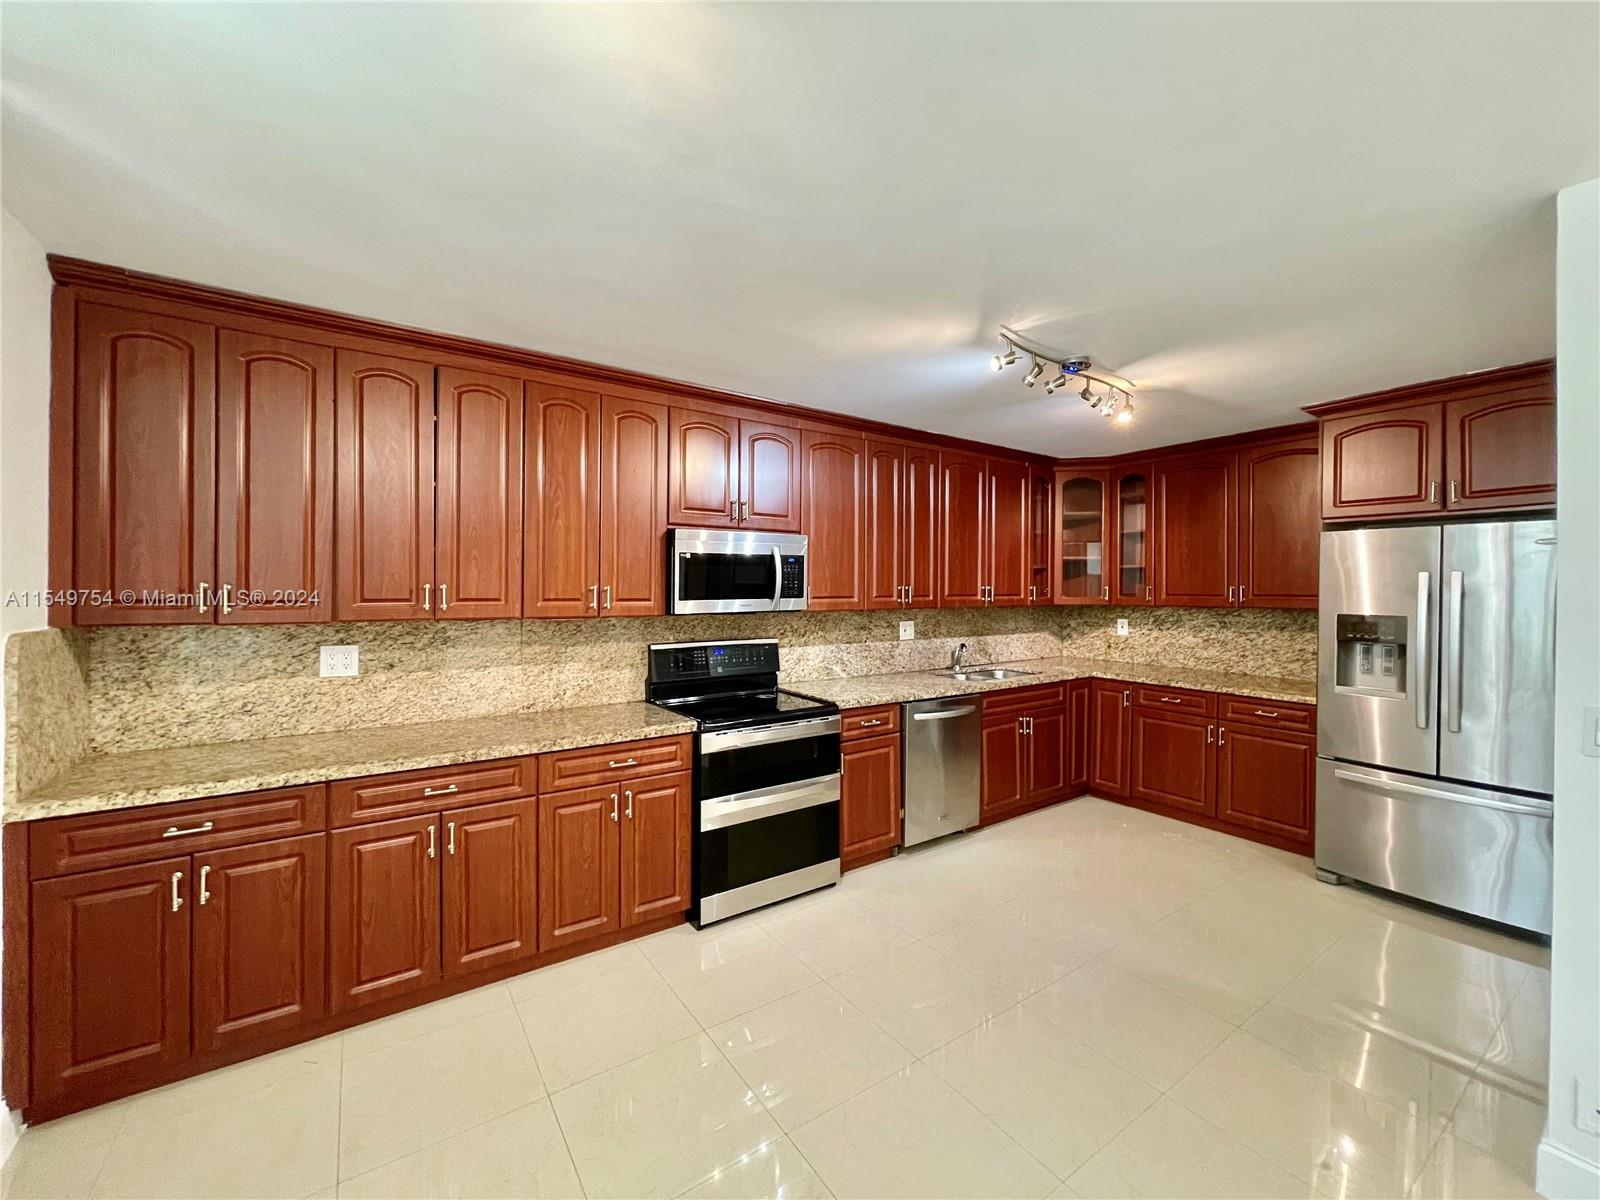 a large kitchen with granite countertop stainless steel appliances and wooden cabinets